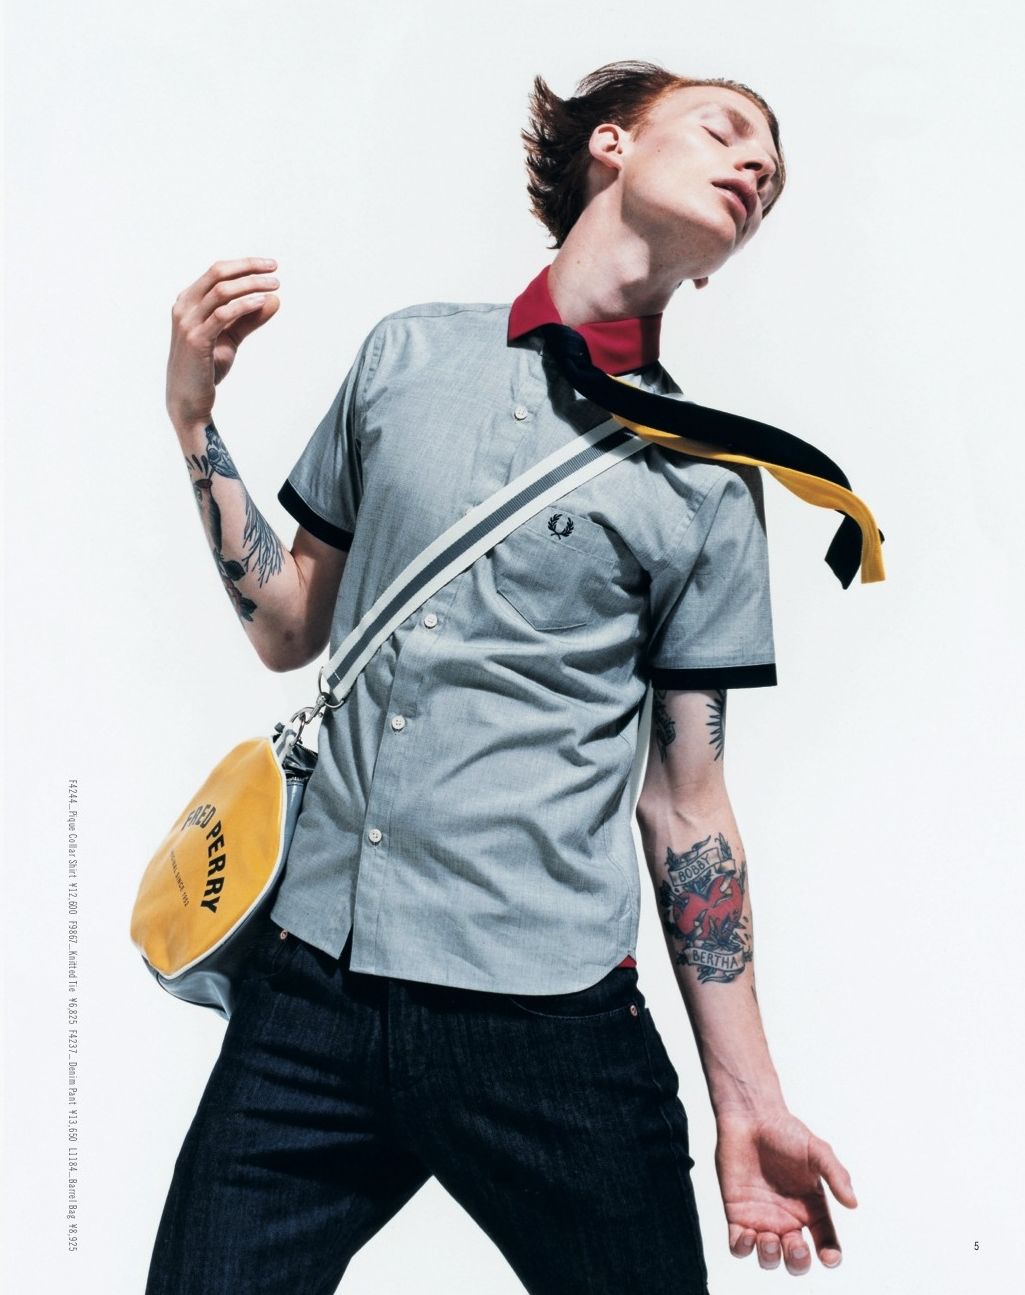 Fred Perry Men's Authentic Collection SS13_002Daniel Bitsch-During